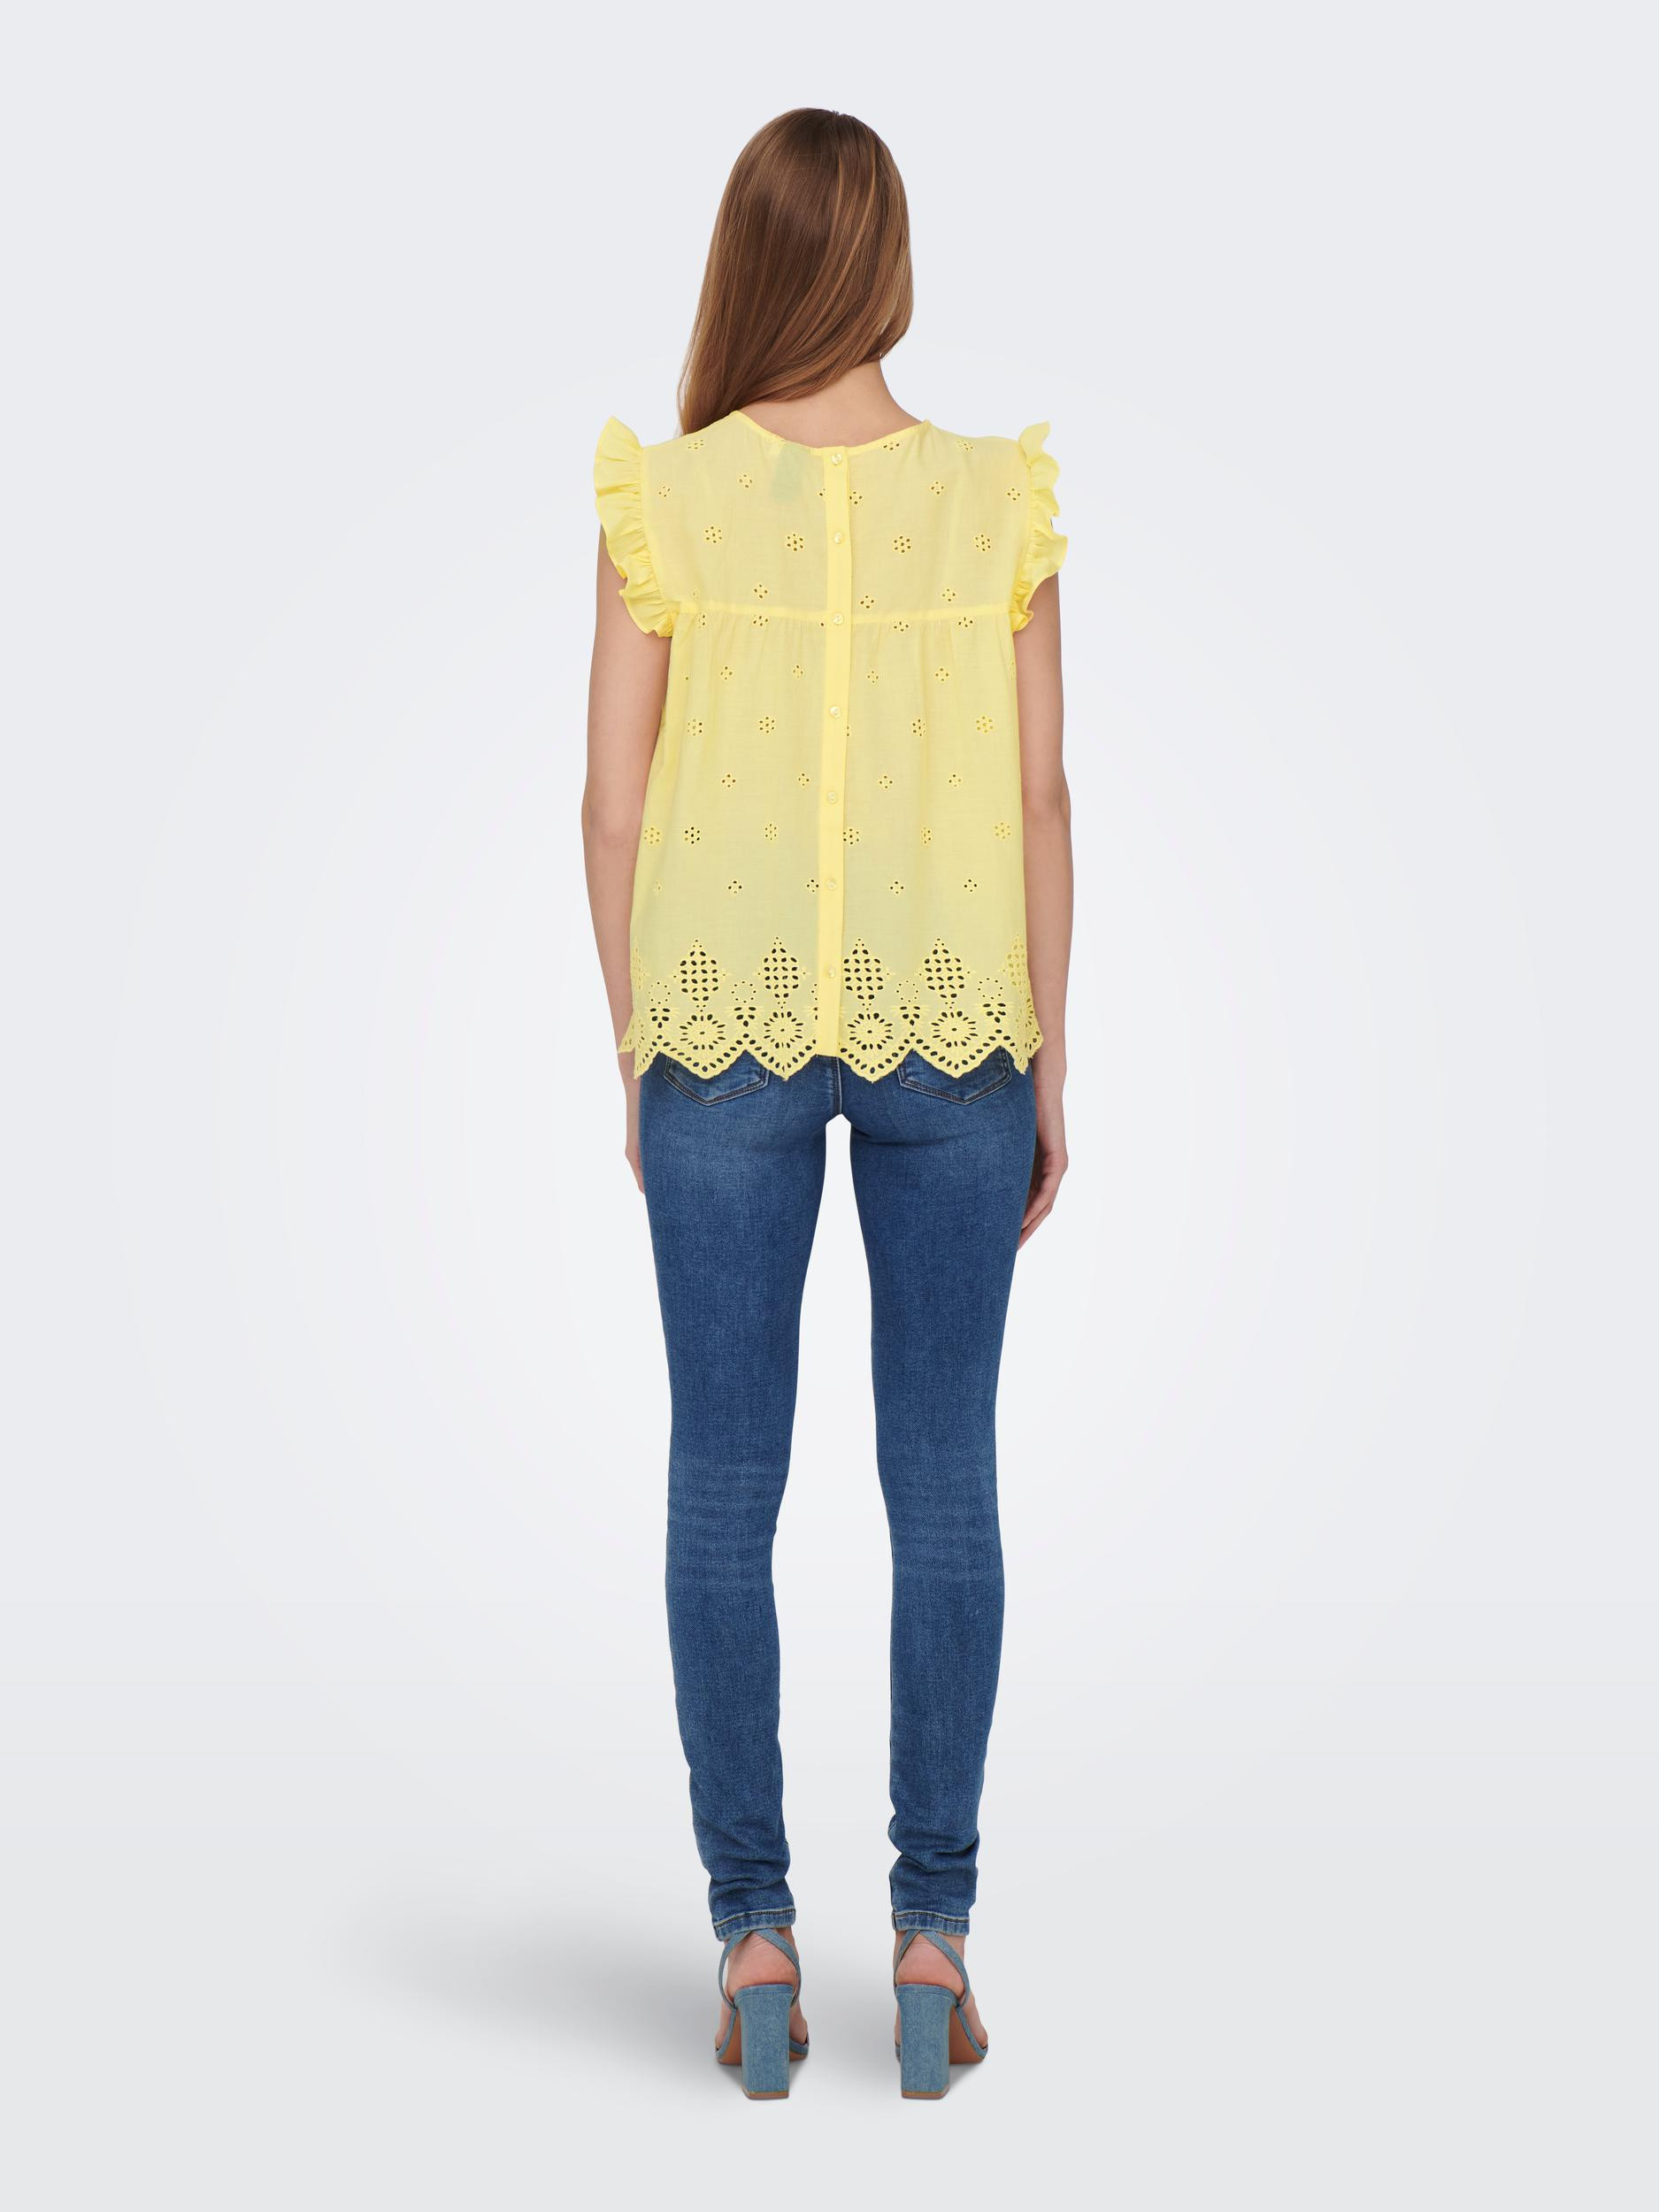 Only - Cotton top, Yellow, large image number 5